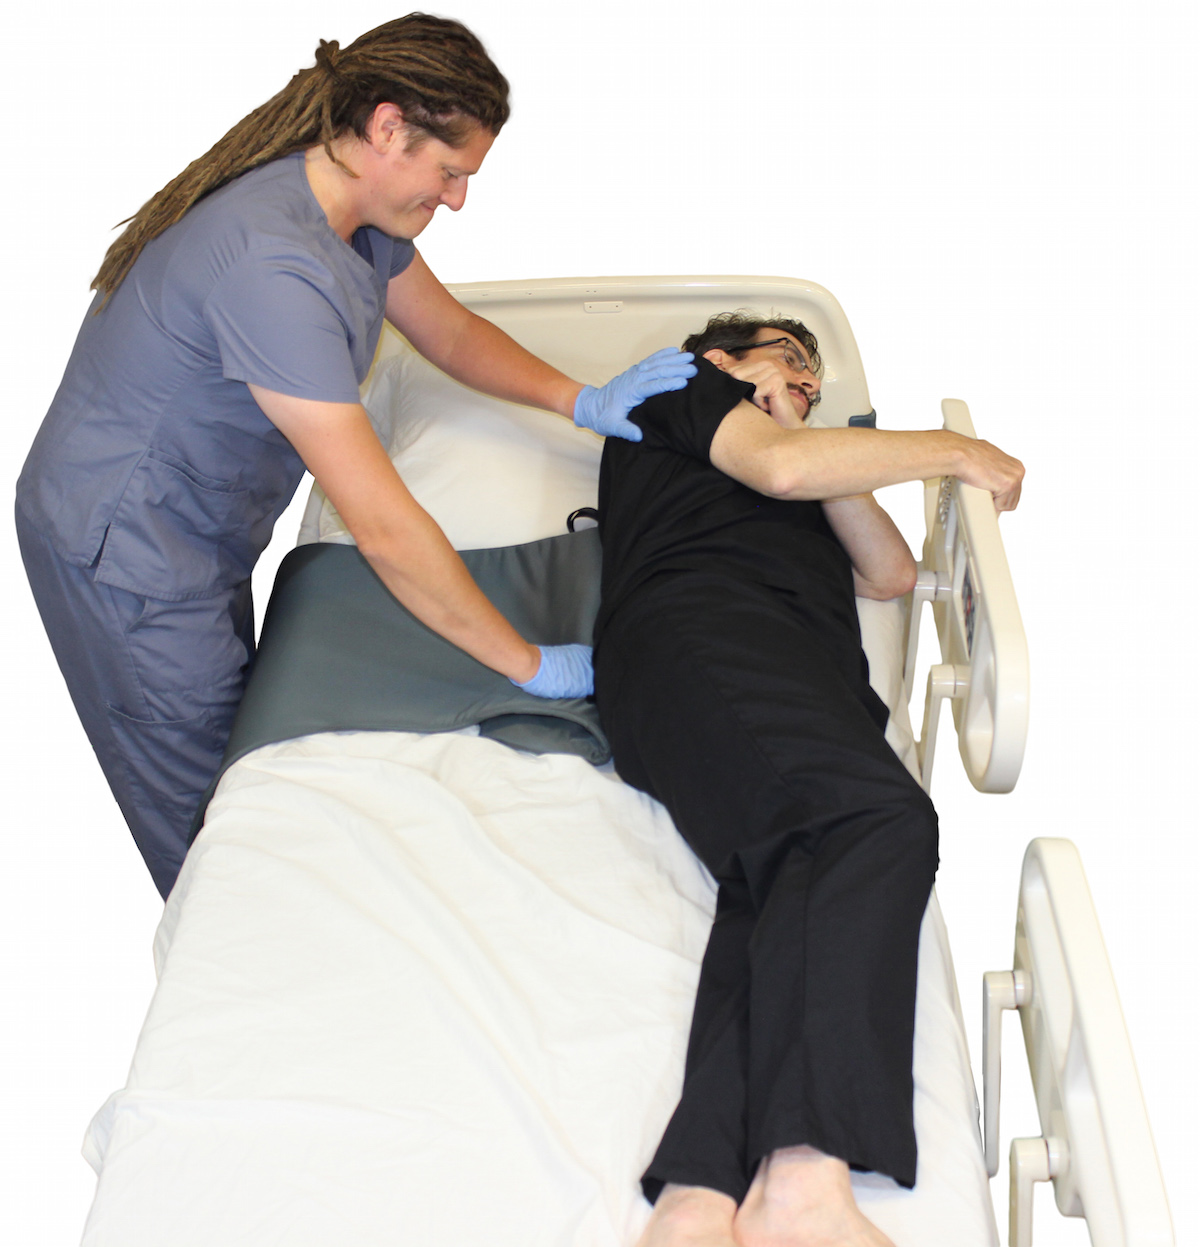 Placing Twin Turner under small of patient's back